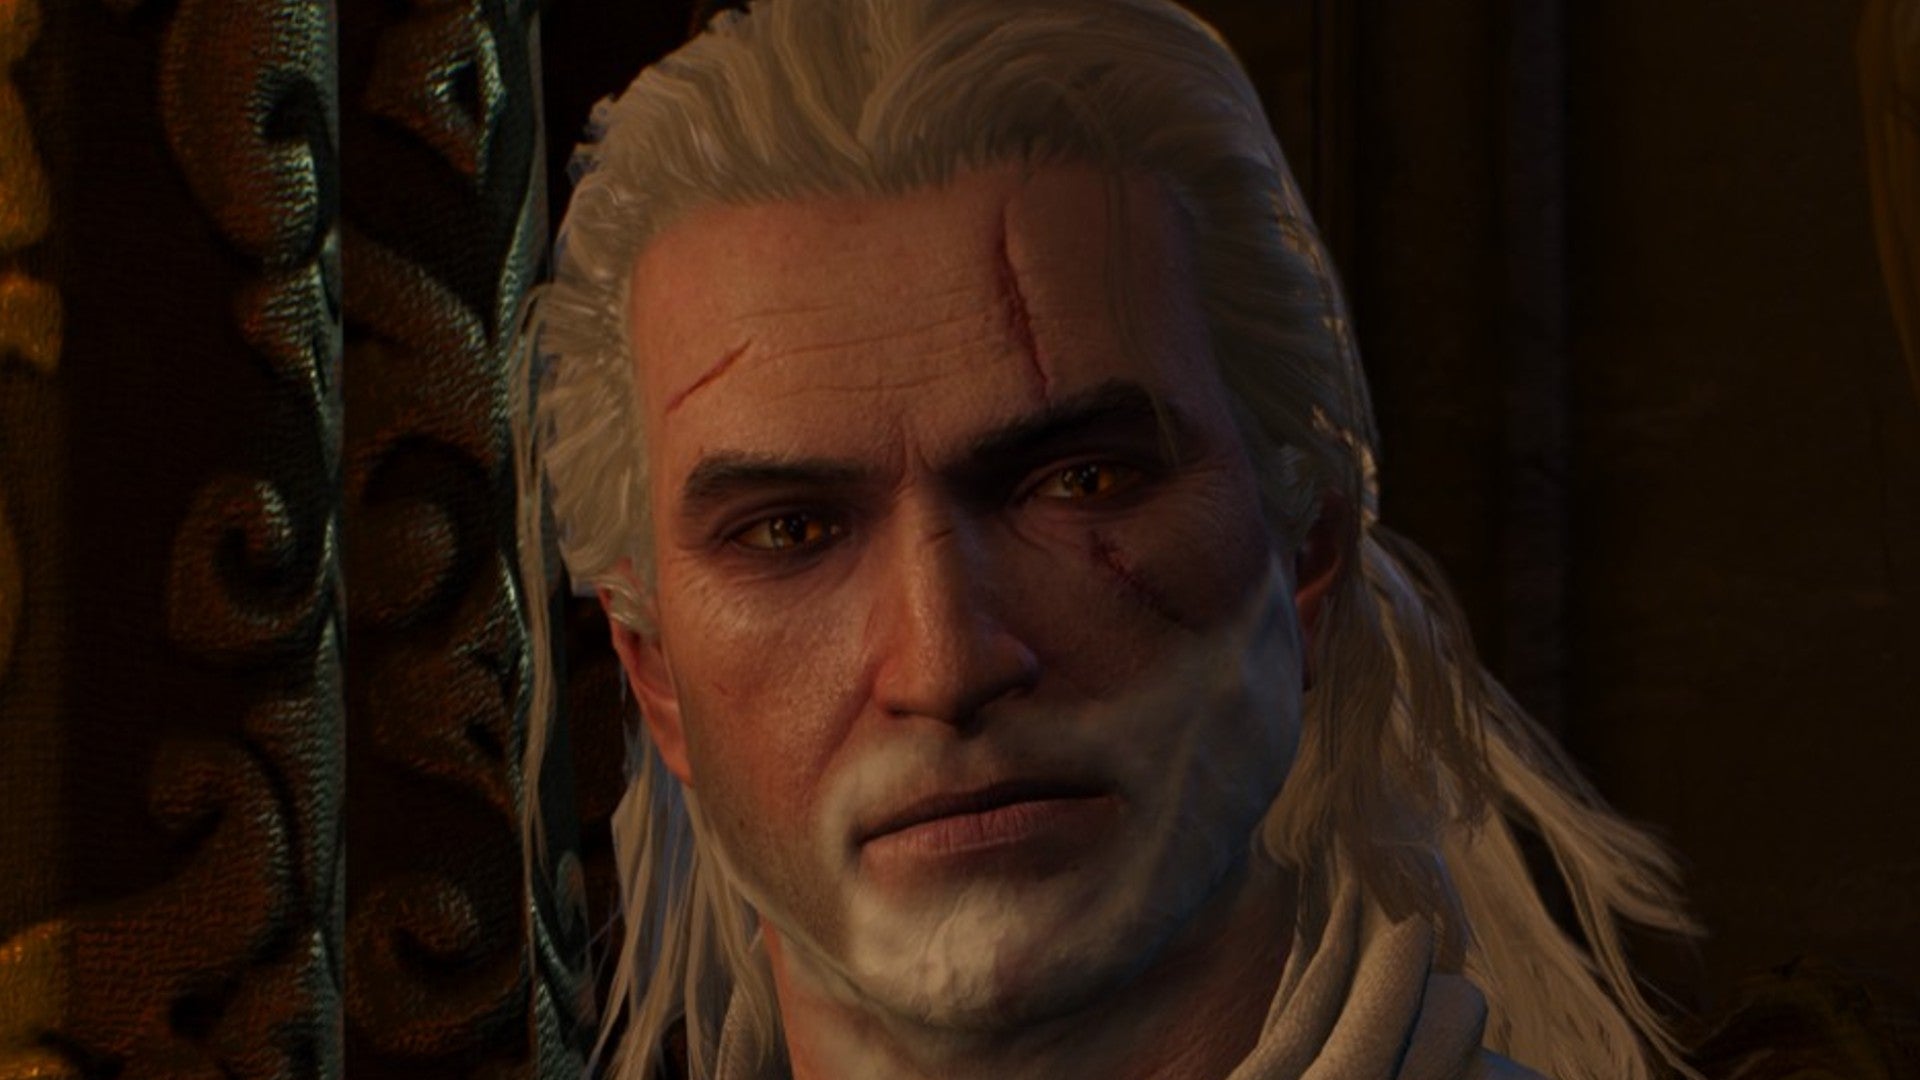 What is Geralt's hairstyle from The Witcher Netflix series called, and how  can I style mine like it? - Quora